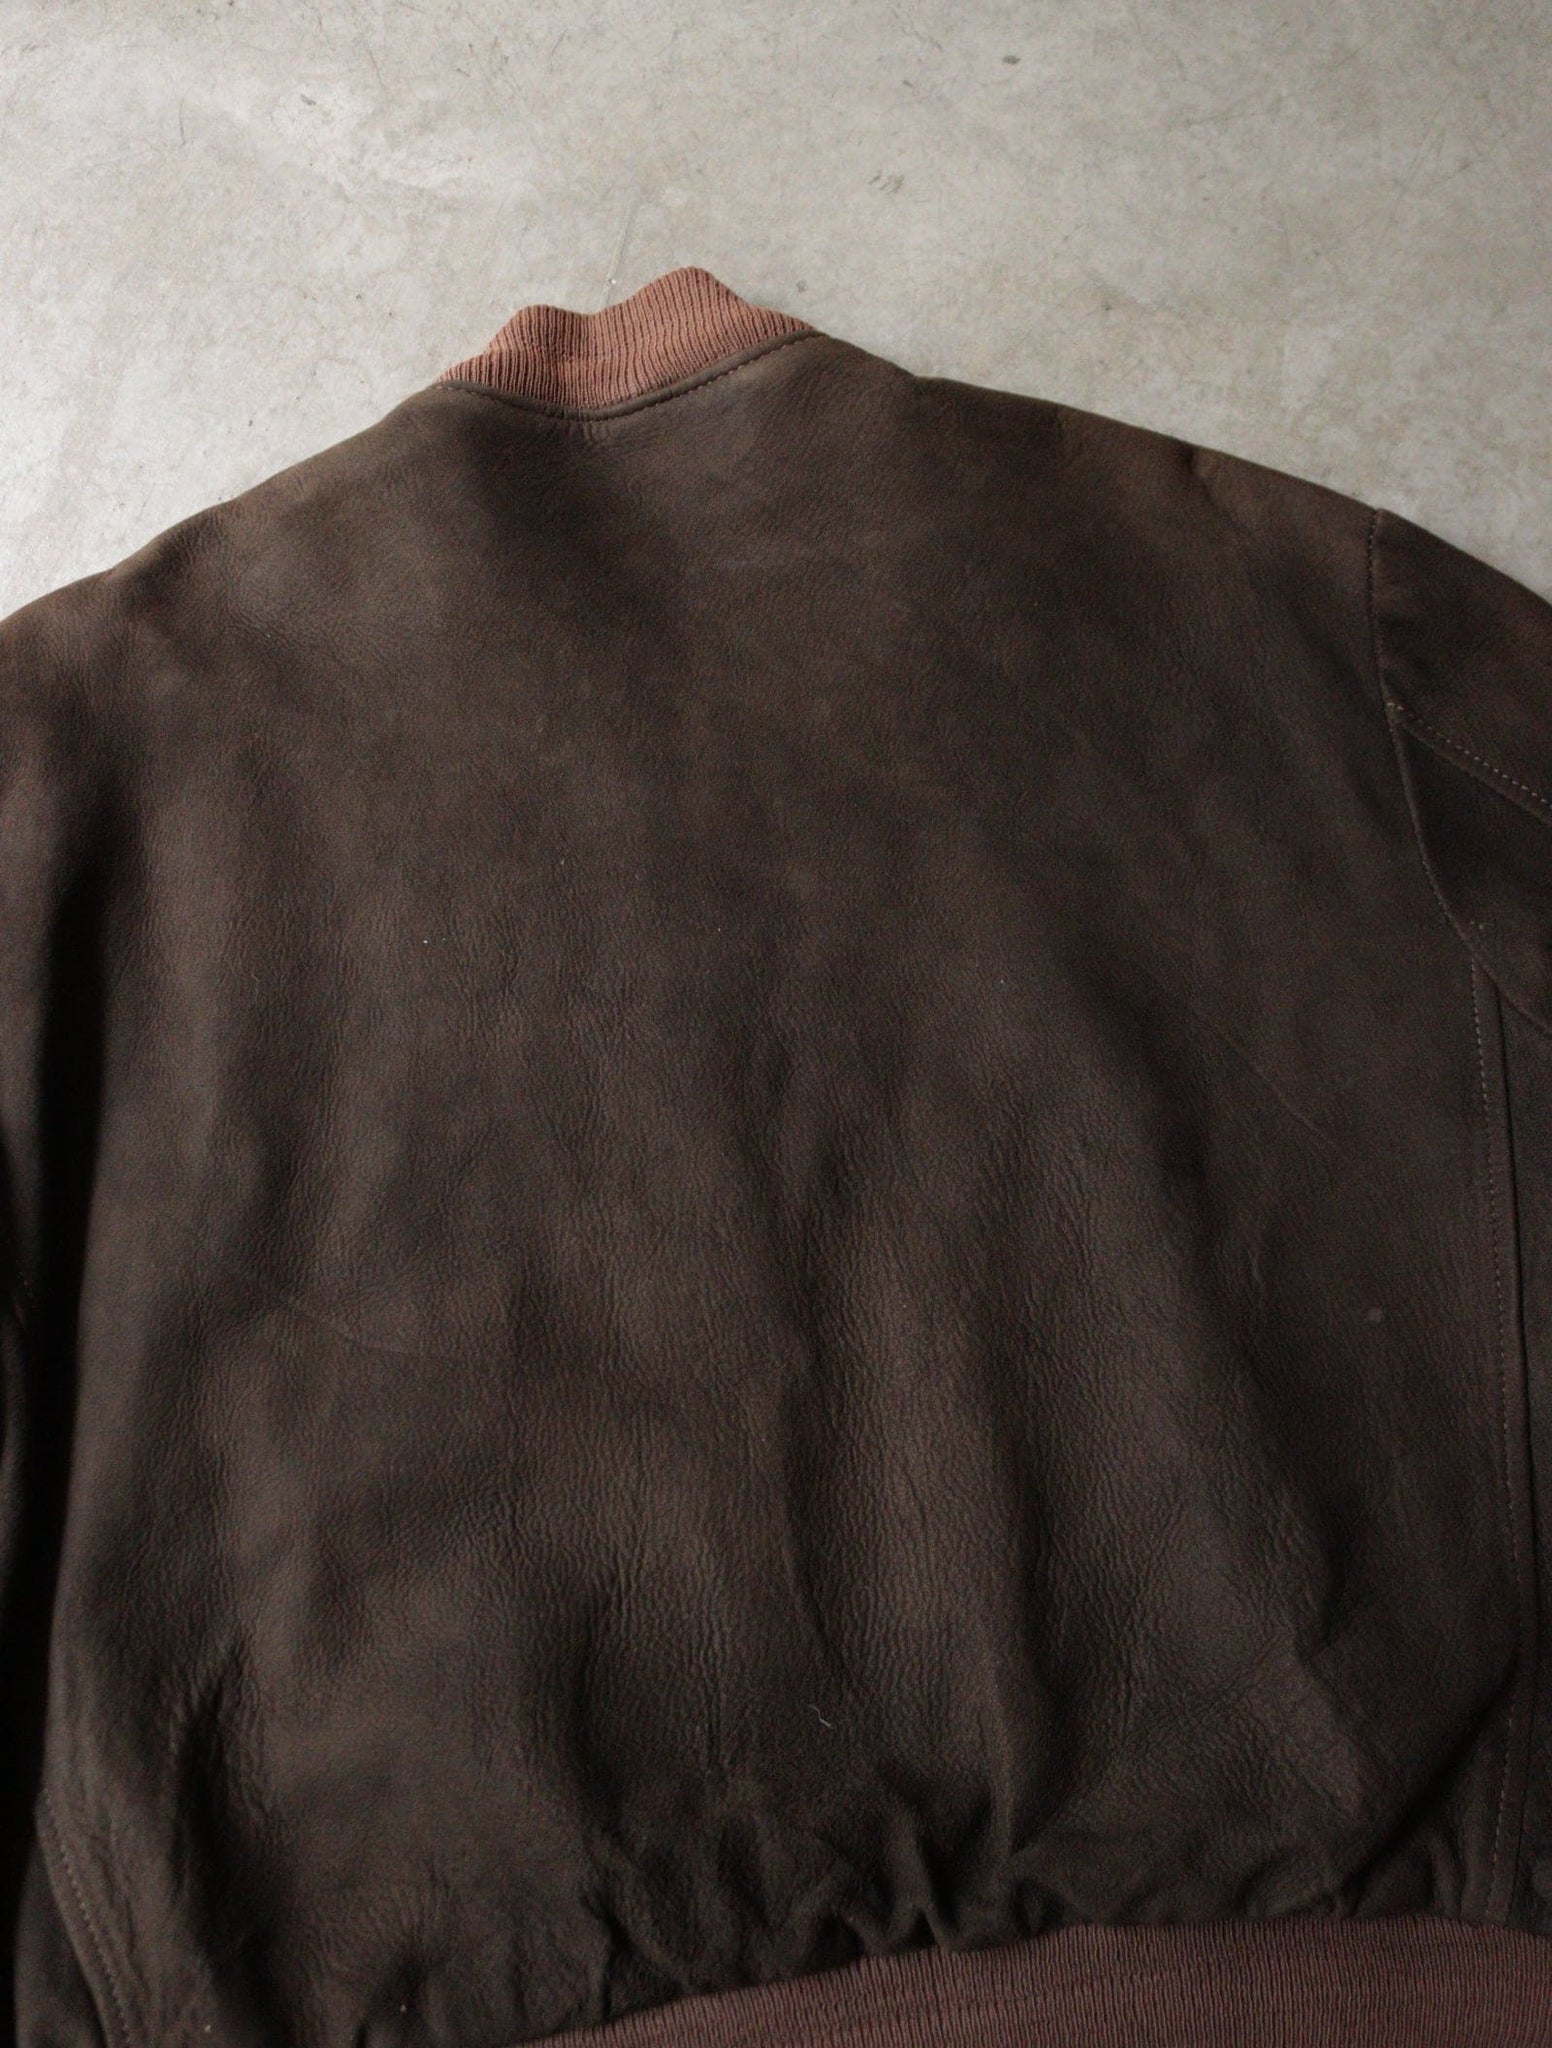 1950S CRINKLED SUEDE LEATHER JACKET